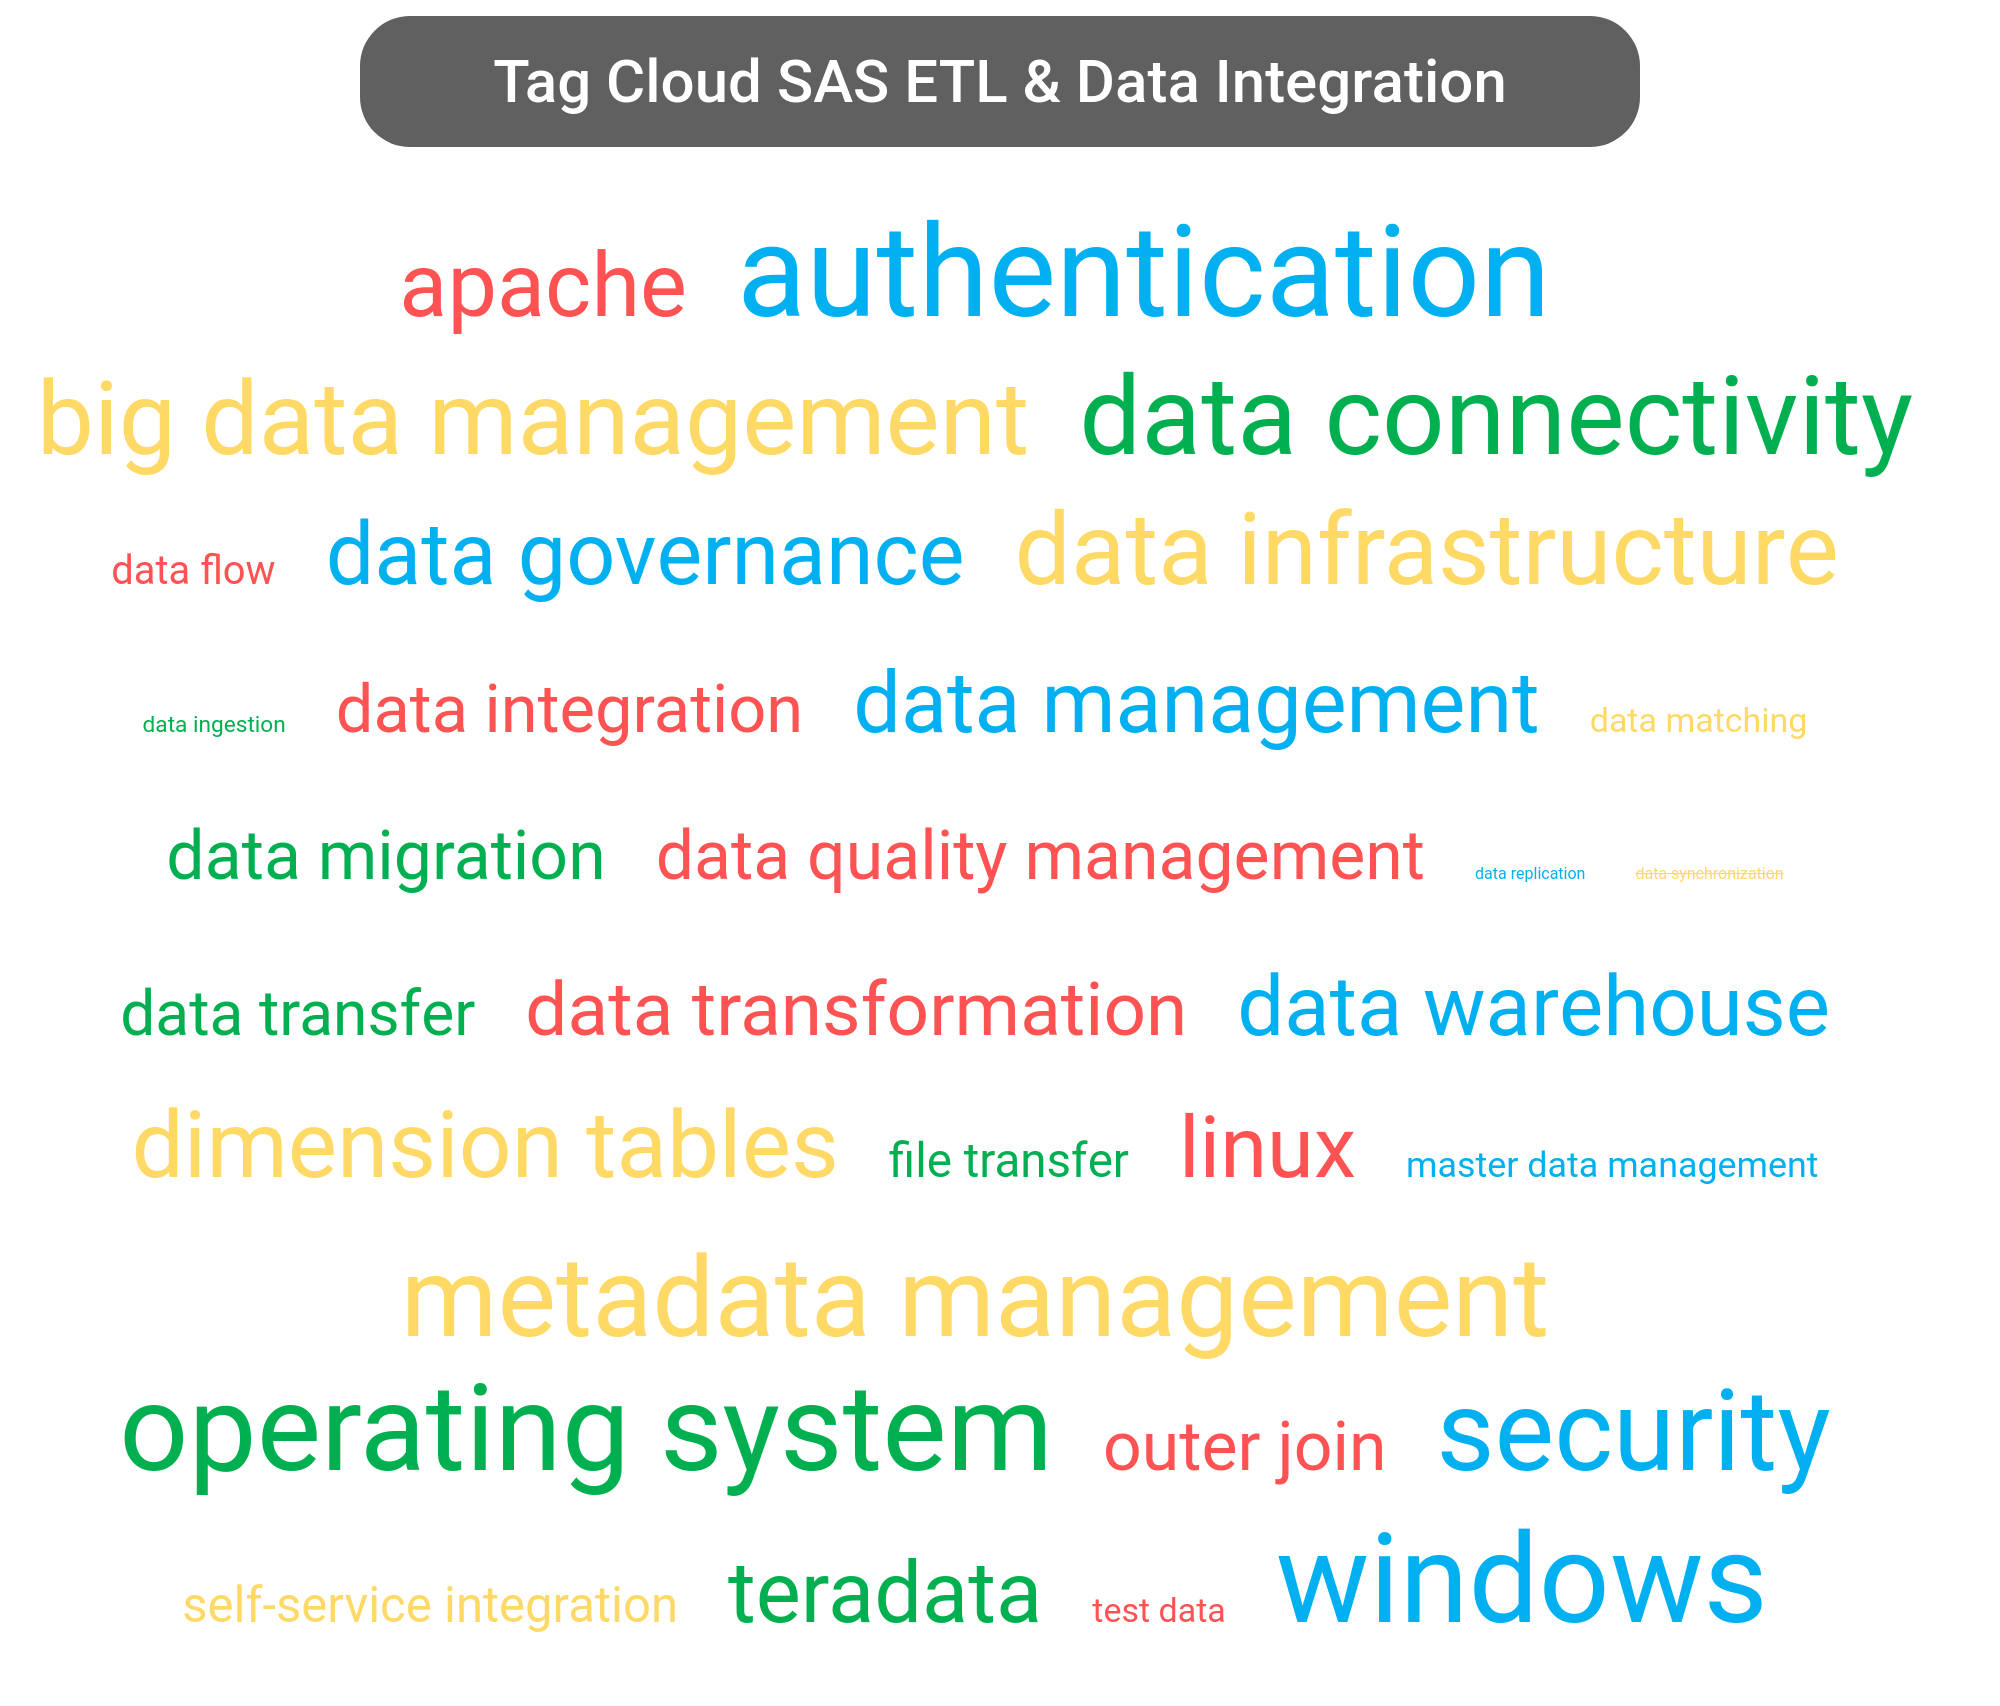 Tag cloud of the SAS Data Integration software.